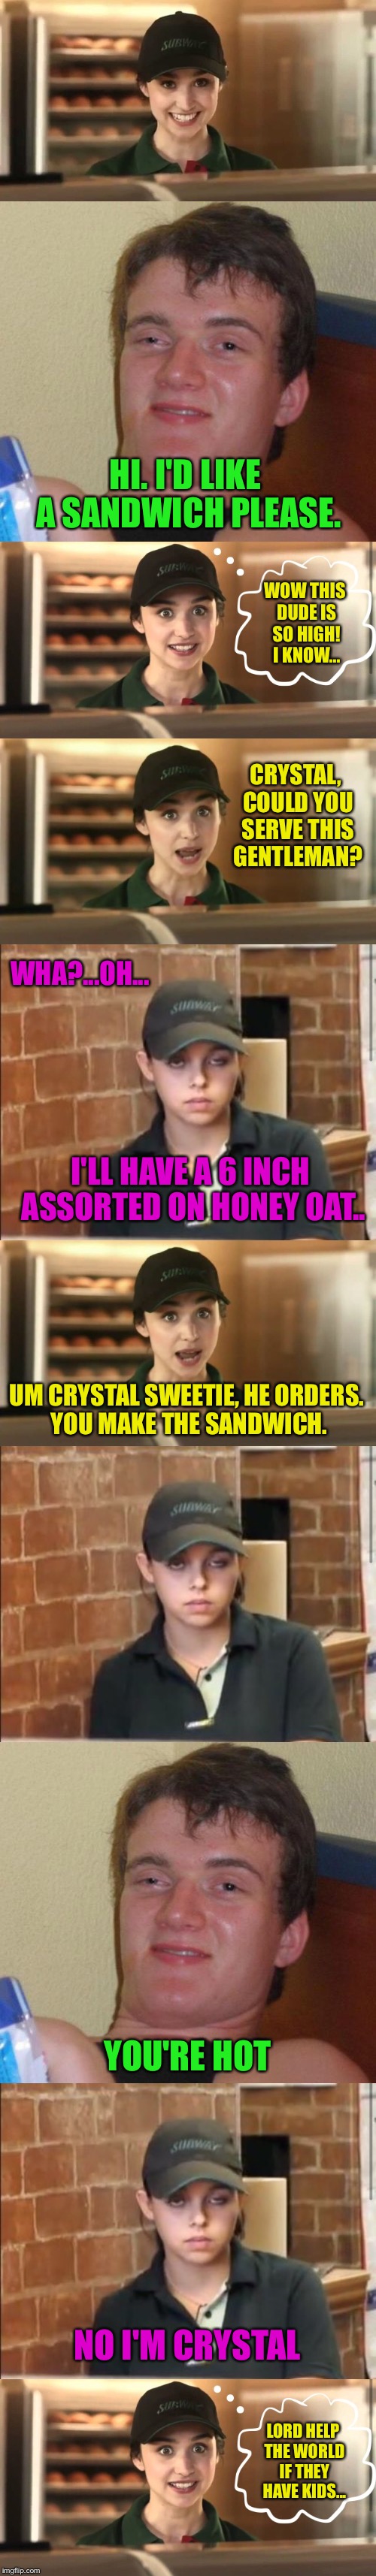 In Case You Wondered, Her Last Name Happens To Be 'Meth' | HI. I'D LIKE A SANDWICH PLEASE. WOW THIS DUDE IS SO HIGH! I KNOW... WHA?...OH... CRYSTAL, COULD YOU SERVE THIS GENTLEMAN? I'LL HAVE A 6 INCH ASSORTED ON HONEY OAT.. UM CRYSTAL SWEETIE, HE ORDERS. YOU MAKE THE SANDWICH. YOU'RE HOT; NO I'M CRYSTAL; LORD HELP THE WORLD IF THEY HAVE KIDS... | image tagged in 10 guy,subway,sandwich,meth,i love you,girlfriend | made w/ Imgflip meme maker